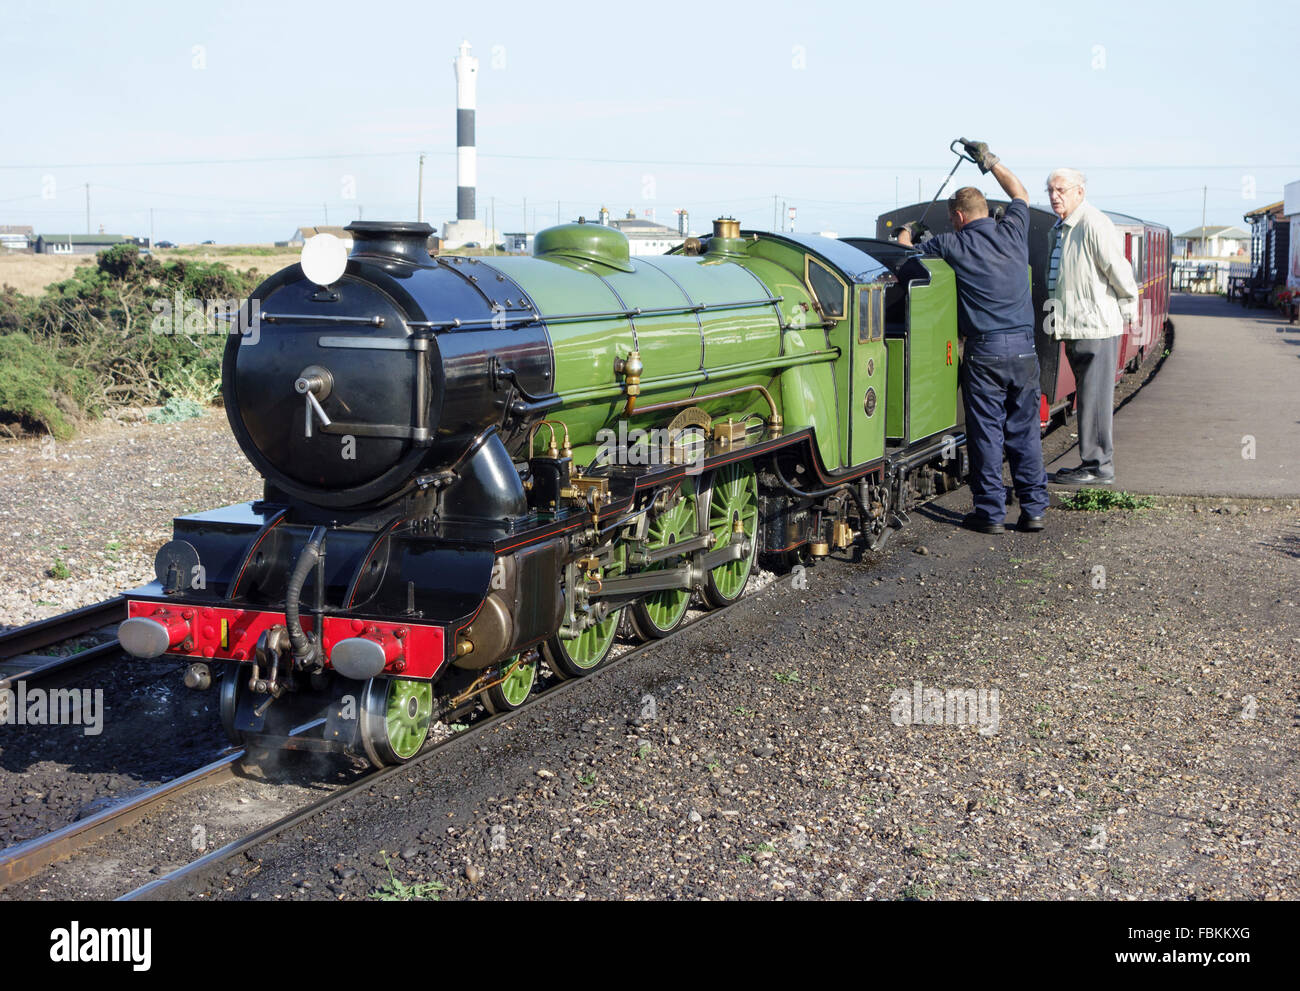 England, Kent, Dungeness. An engineer checks the water levels in the miniature steam locomotive, 'Green Goddess' Stock Photo